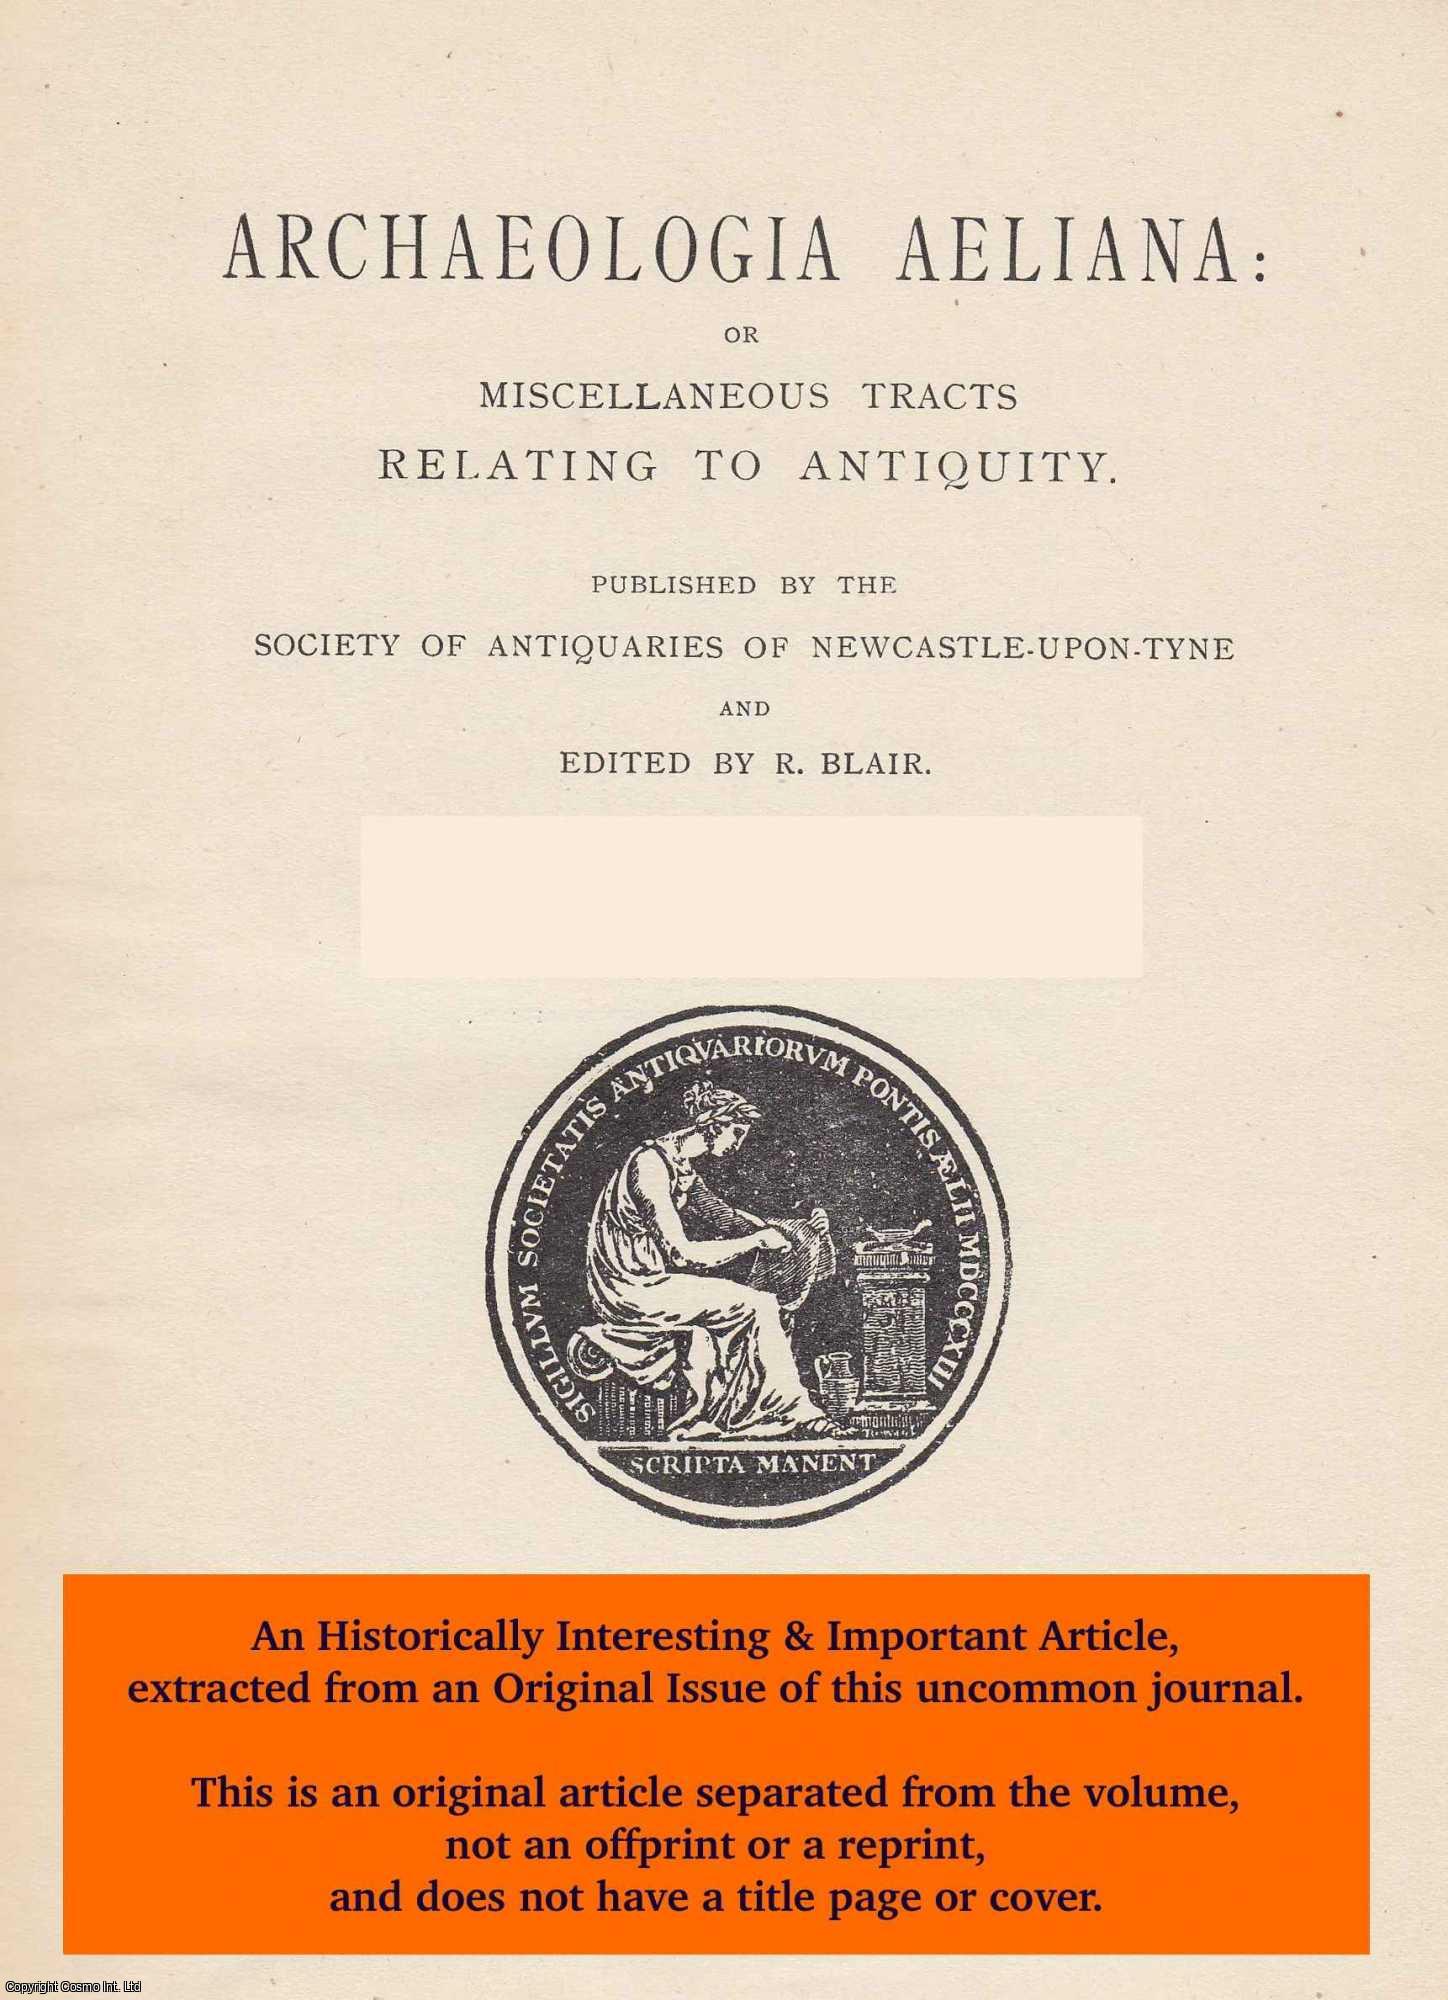 J. M. W. Bean, J. M. W. - The Percies and Their Estates in Scotland. An original article from The Archaeologia Aeliana: or Miscellaneous Tracts Relating to Antiquity, 1957.